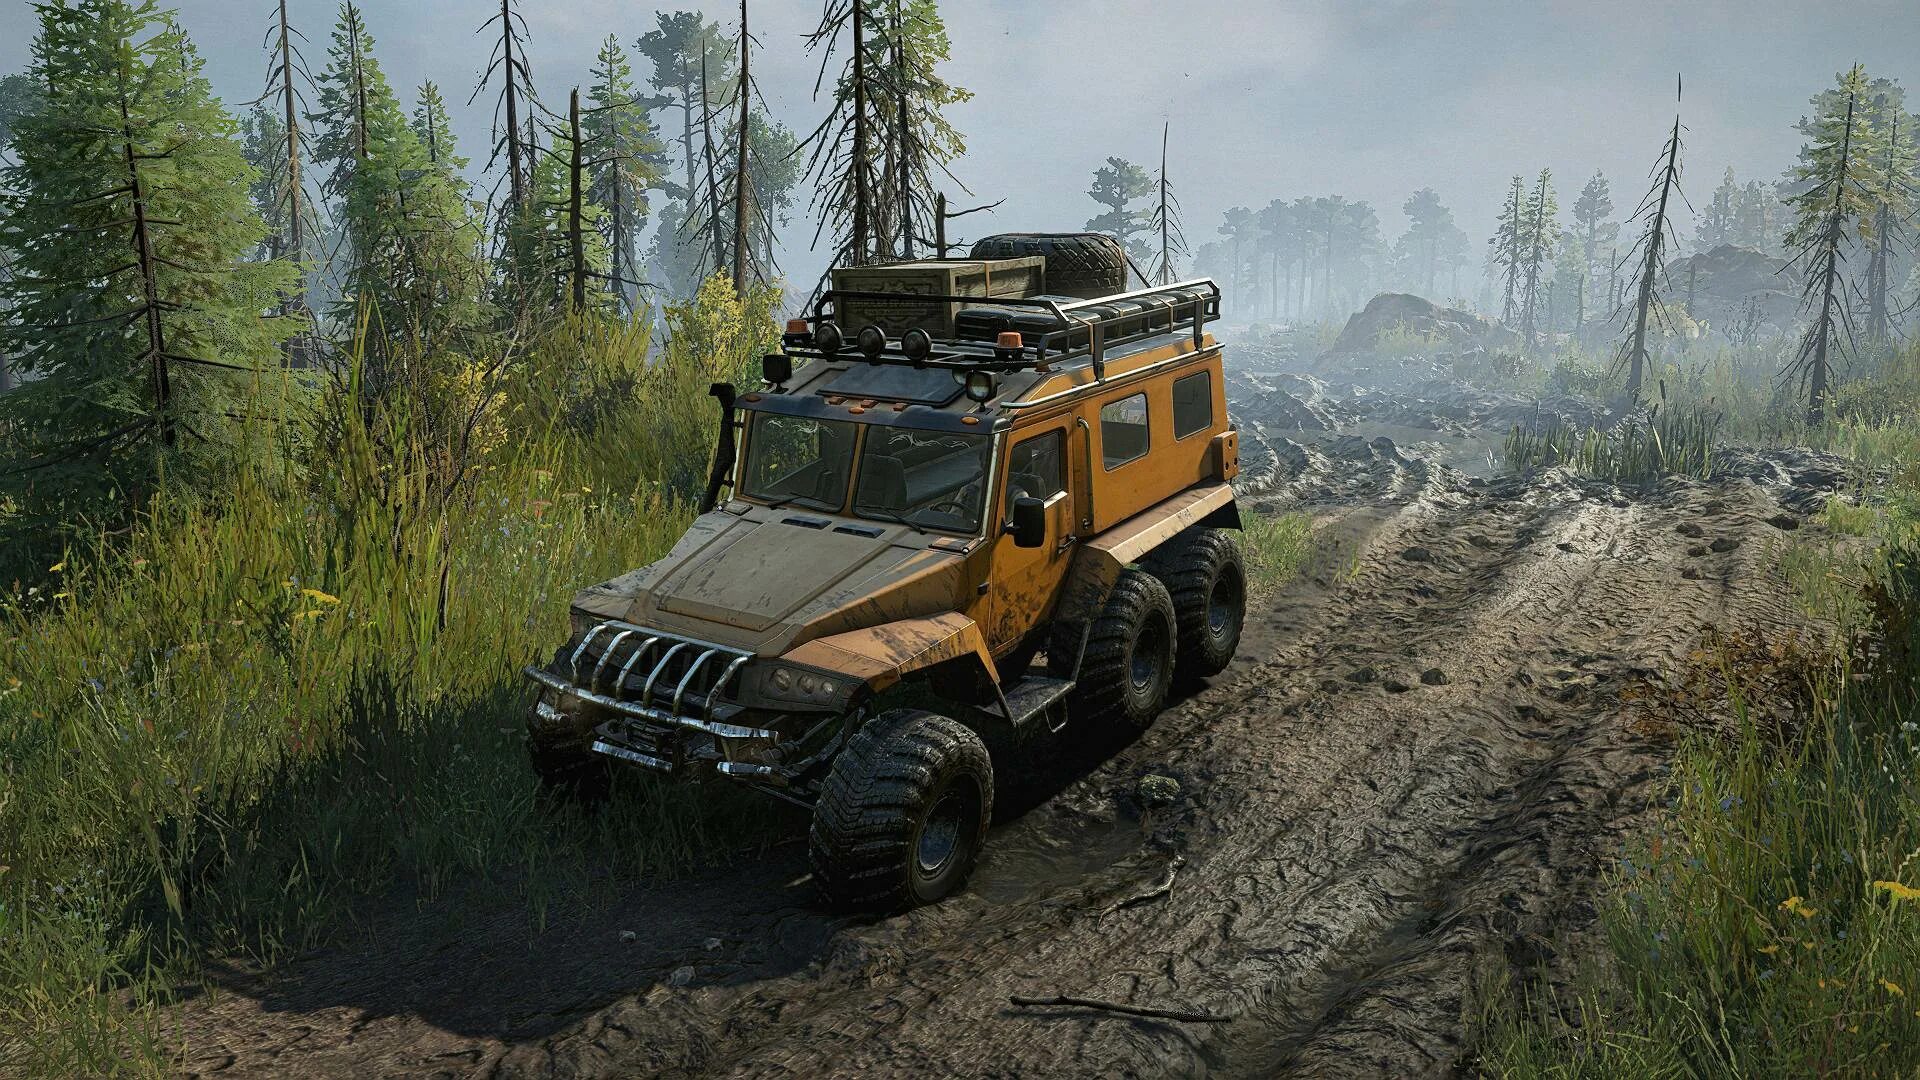 Expeditions a mudrunner game русский. MUDRUNNER или SNOWRUNNER. SNOWRUNNER 2. SNOWRUNNER Висконсин.